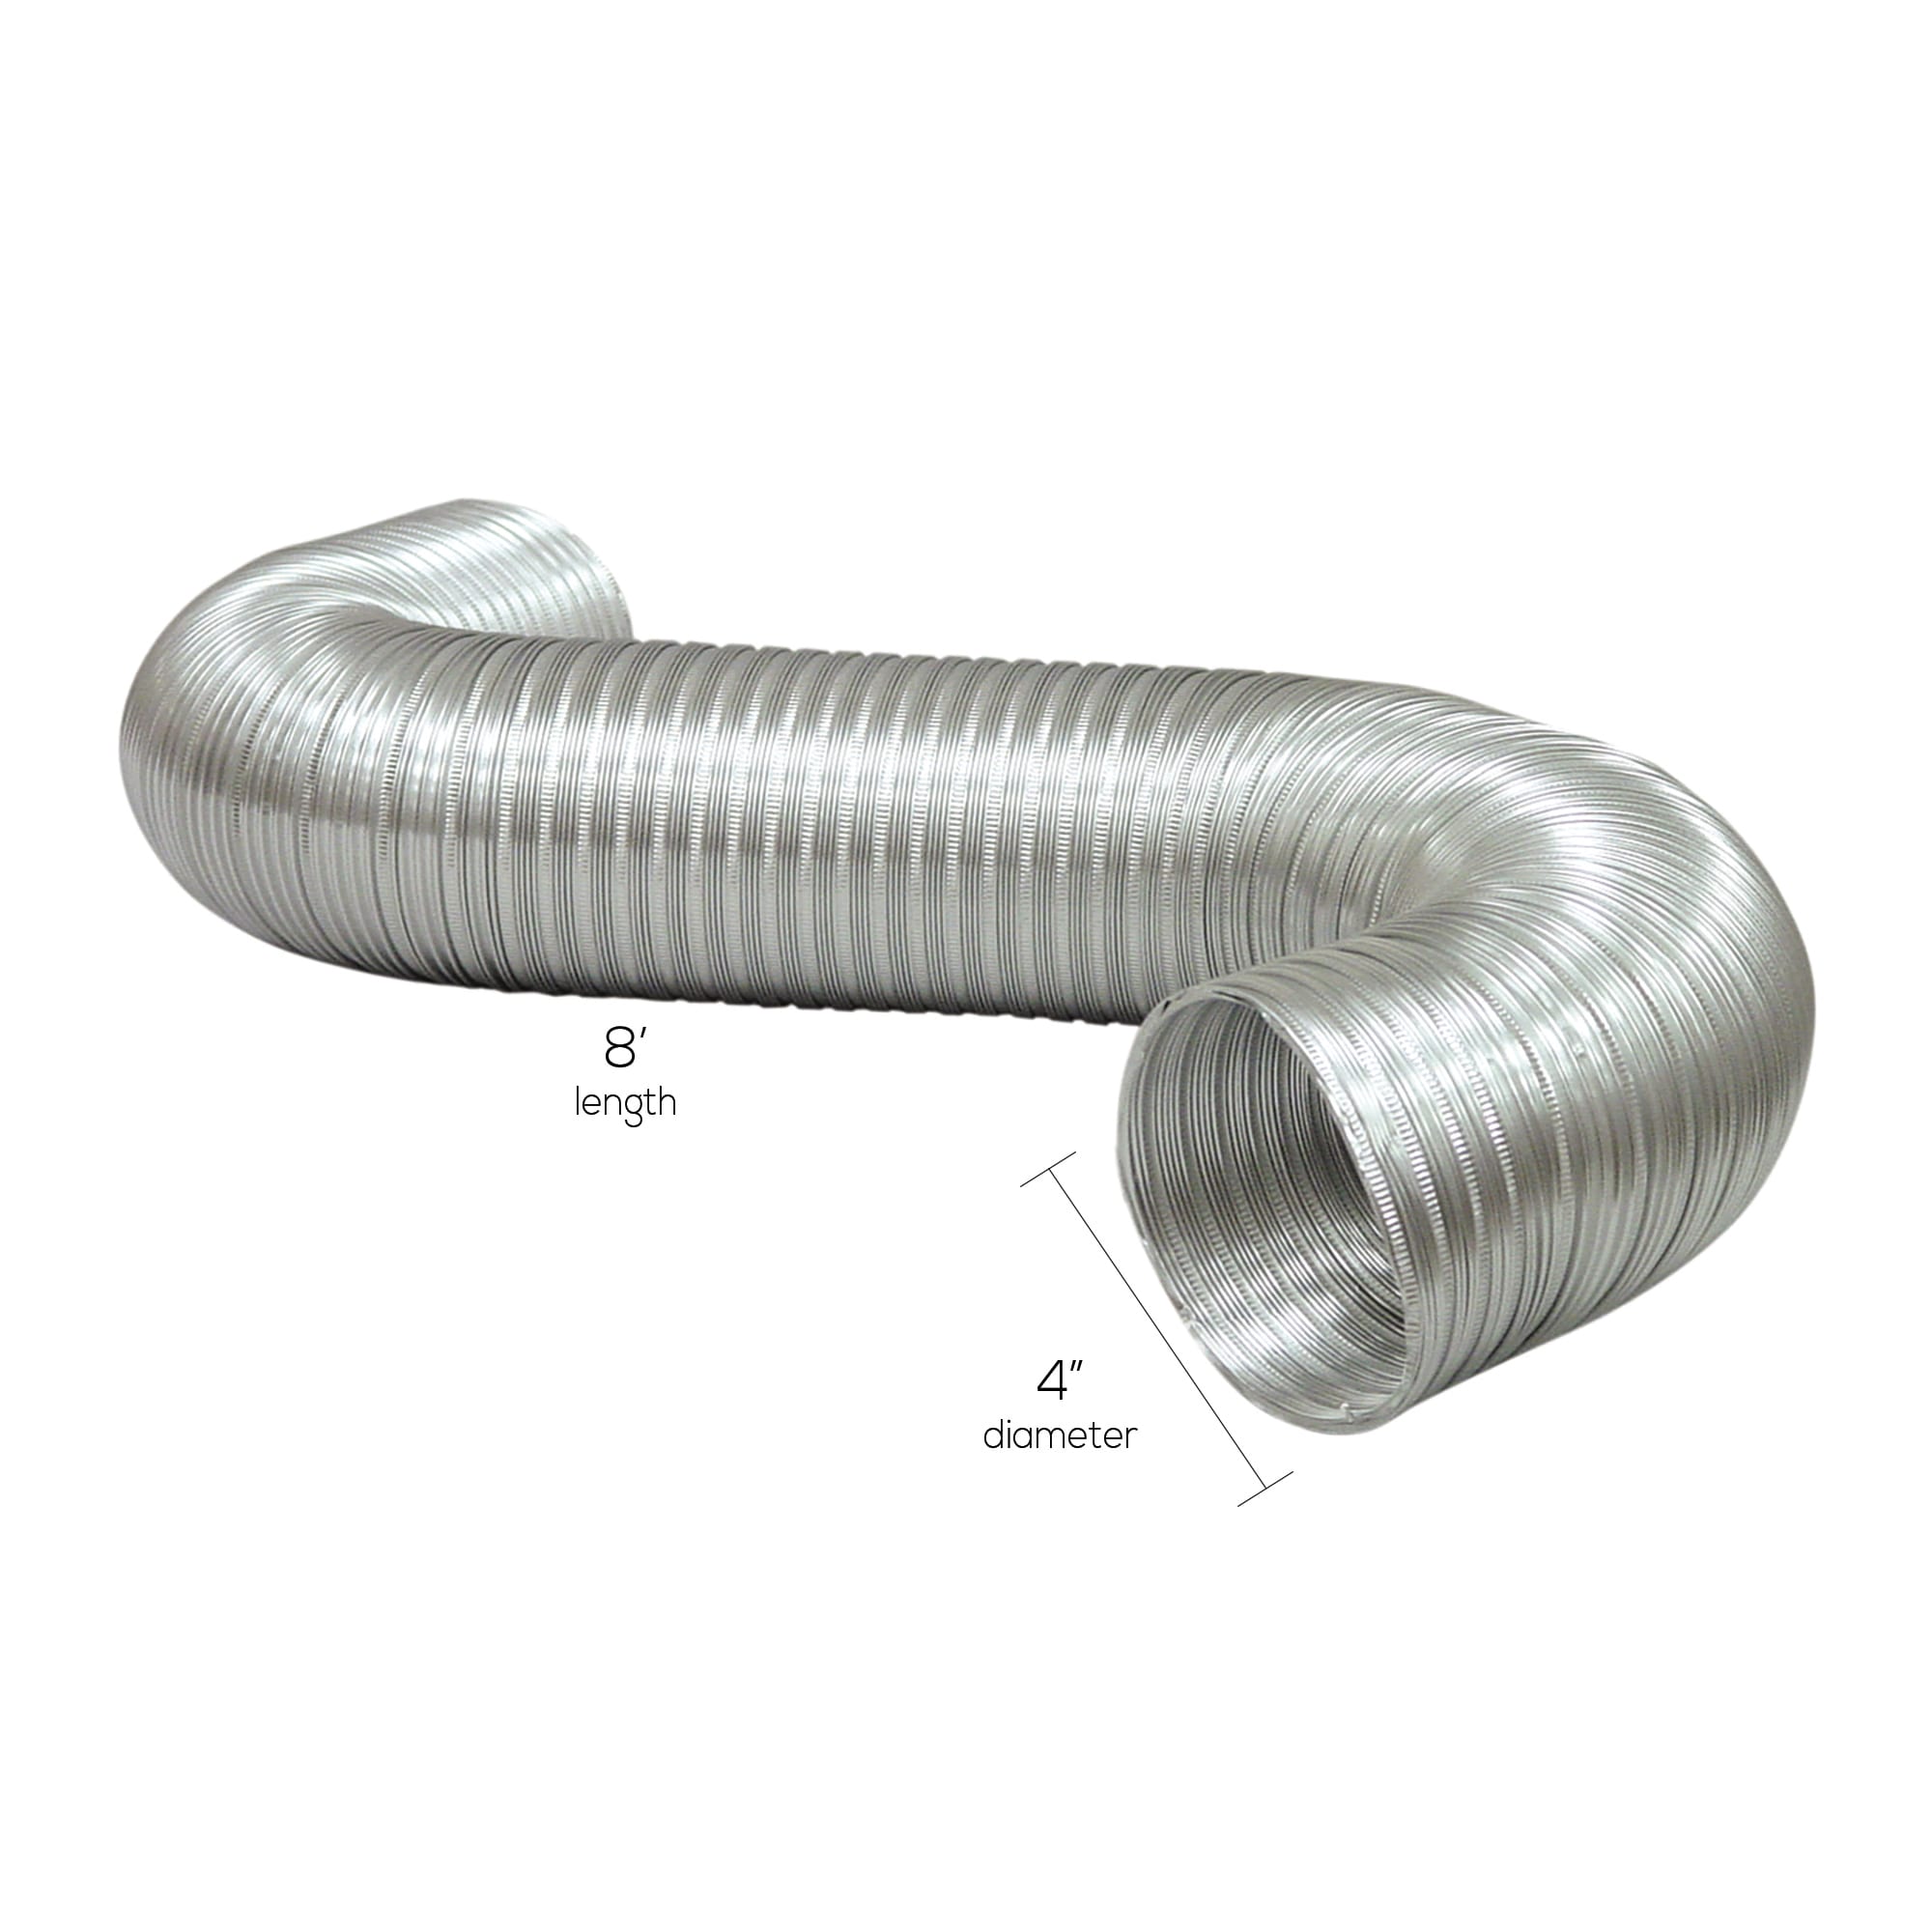 Commercial Exhaust Flex Pipe